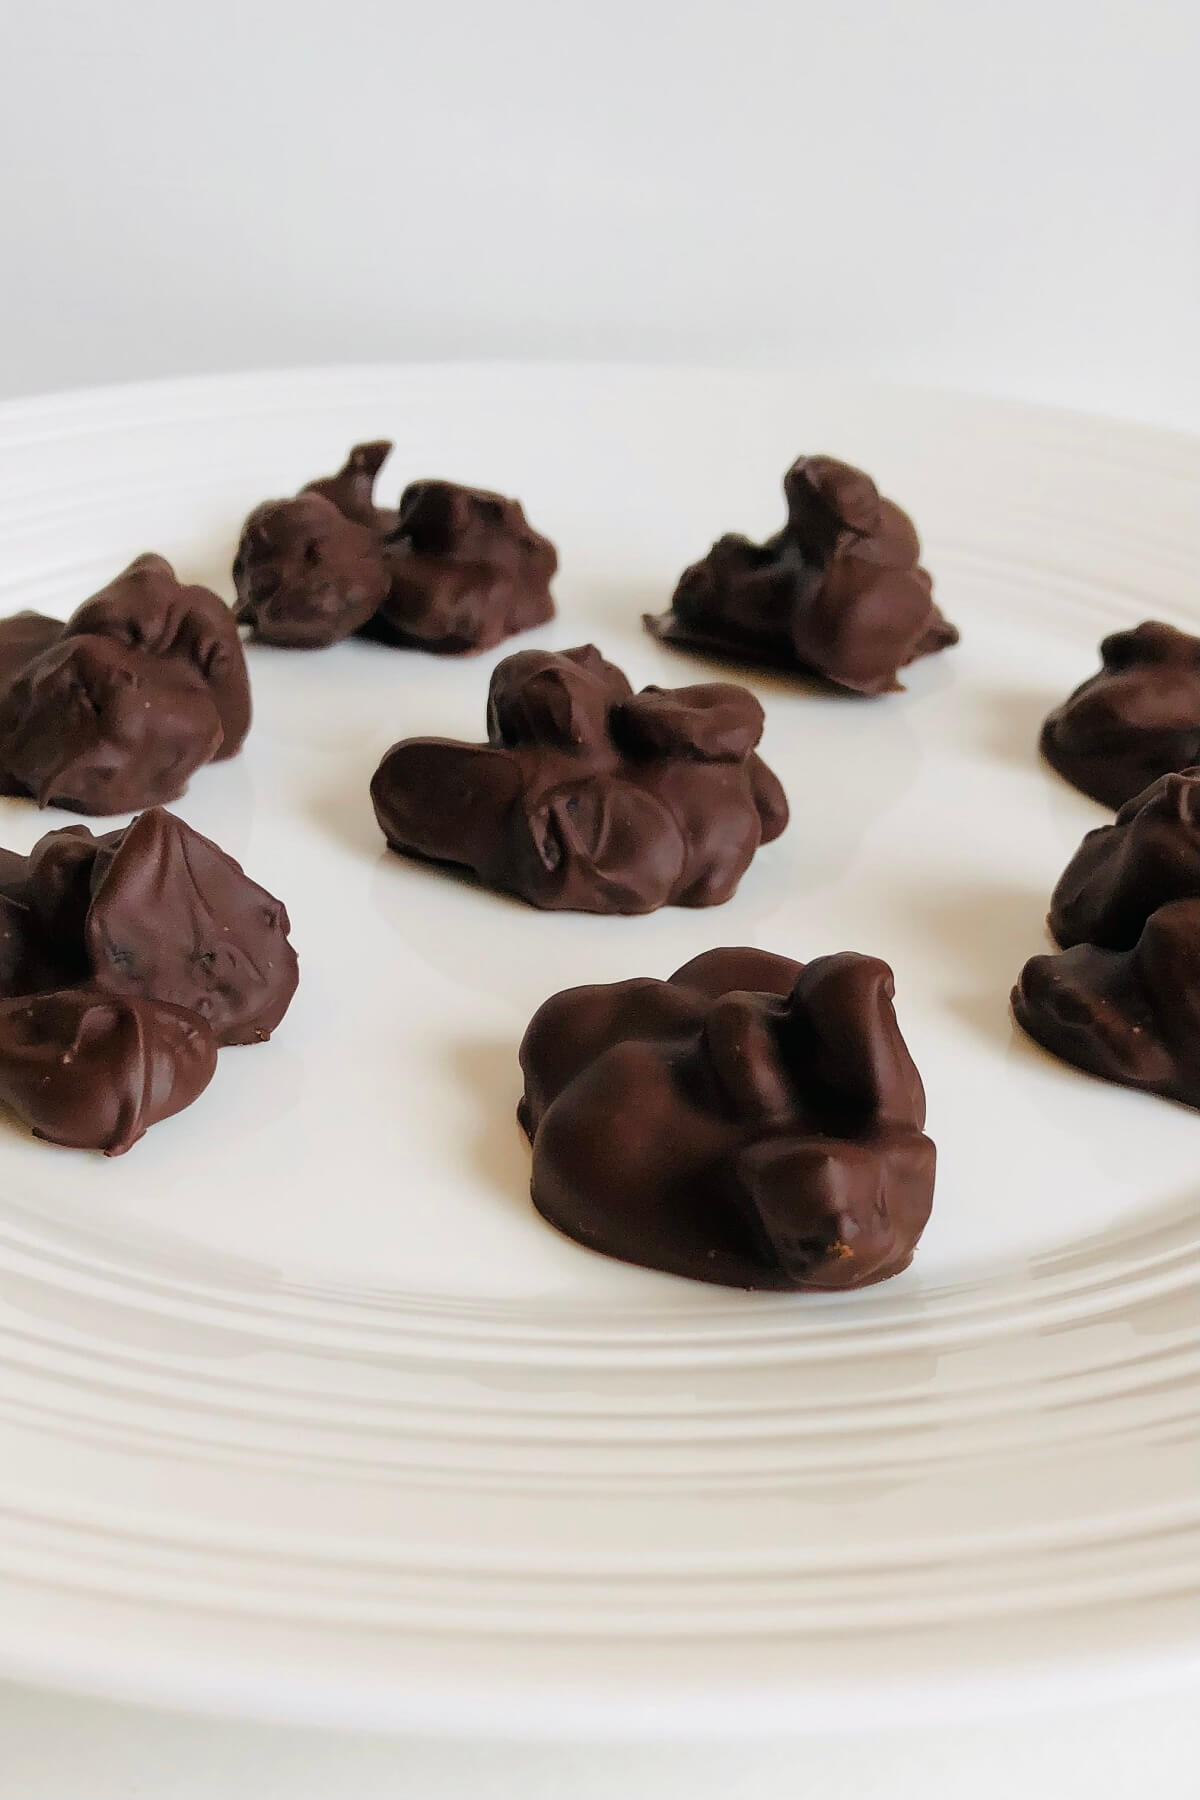 Chocolate dipped cherries on a plate.